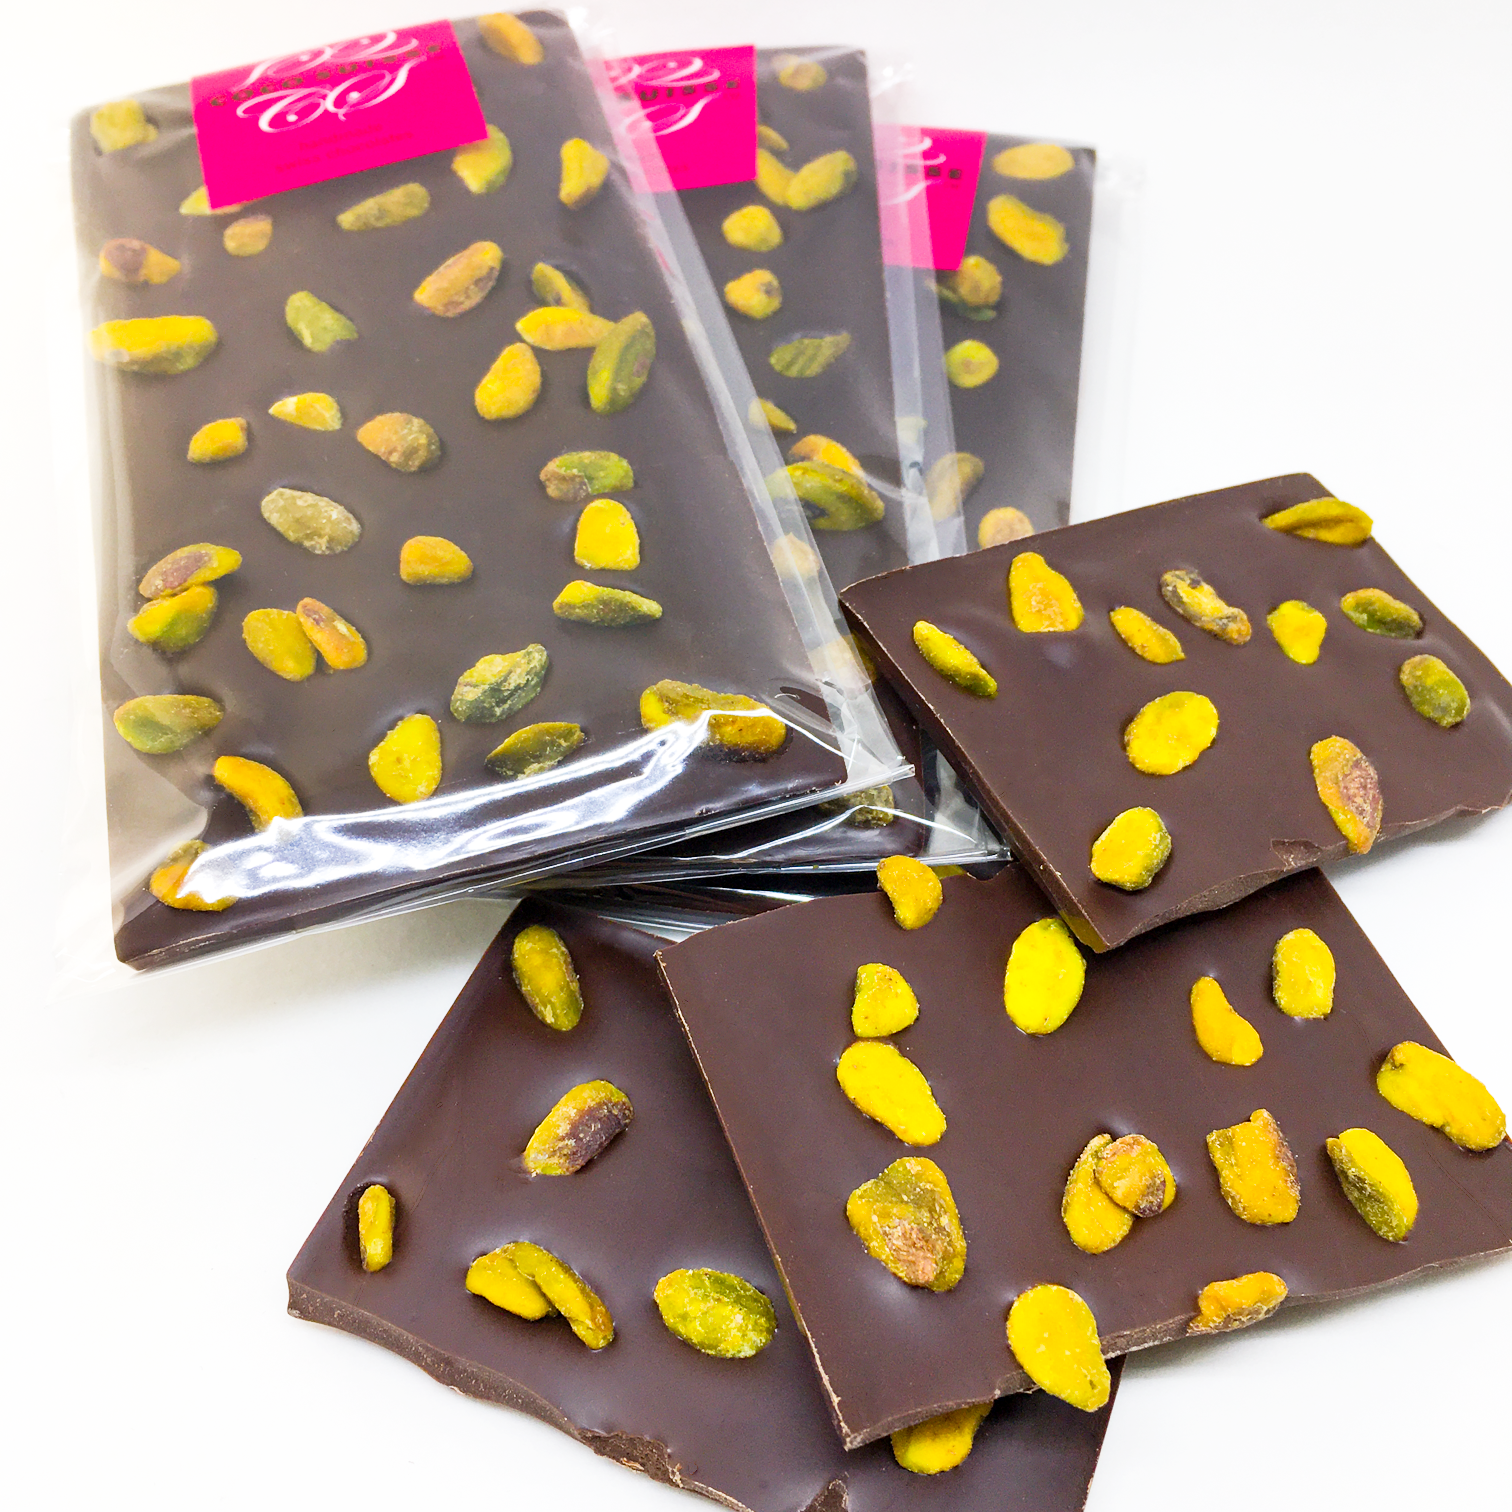 Pistachio Chocolate Bars  90 grams each. Total weight:  270 grams   Delicious and smooth dark Swiss 62% cocoa chocolate topped with nicely roasted and salted pistachios. Fantastic flavor combination will delight your palate and satisfy your chocolate desires.